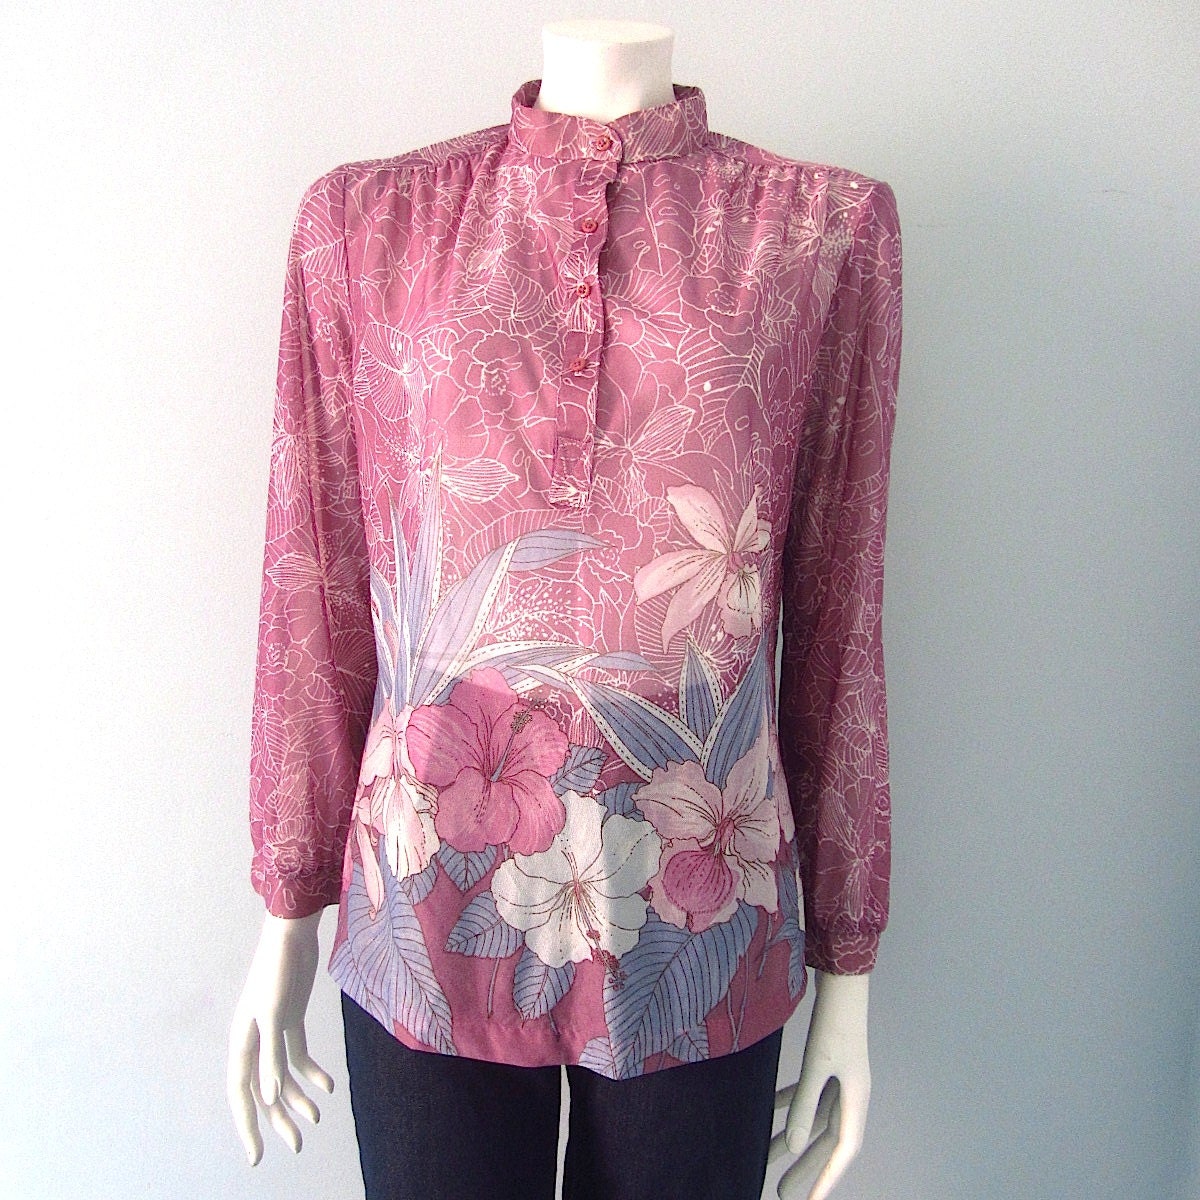 Vintage 80s sheer blouse muted plum pink floral button up